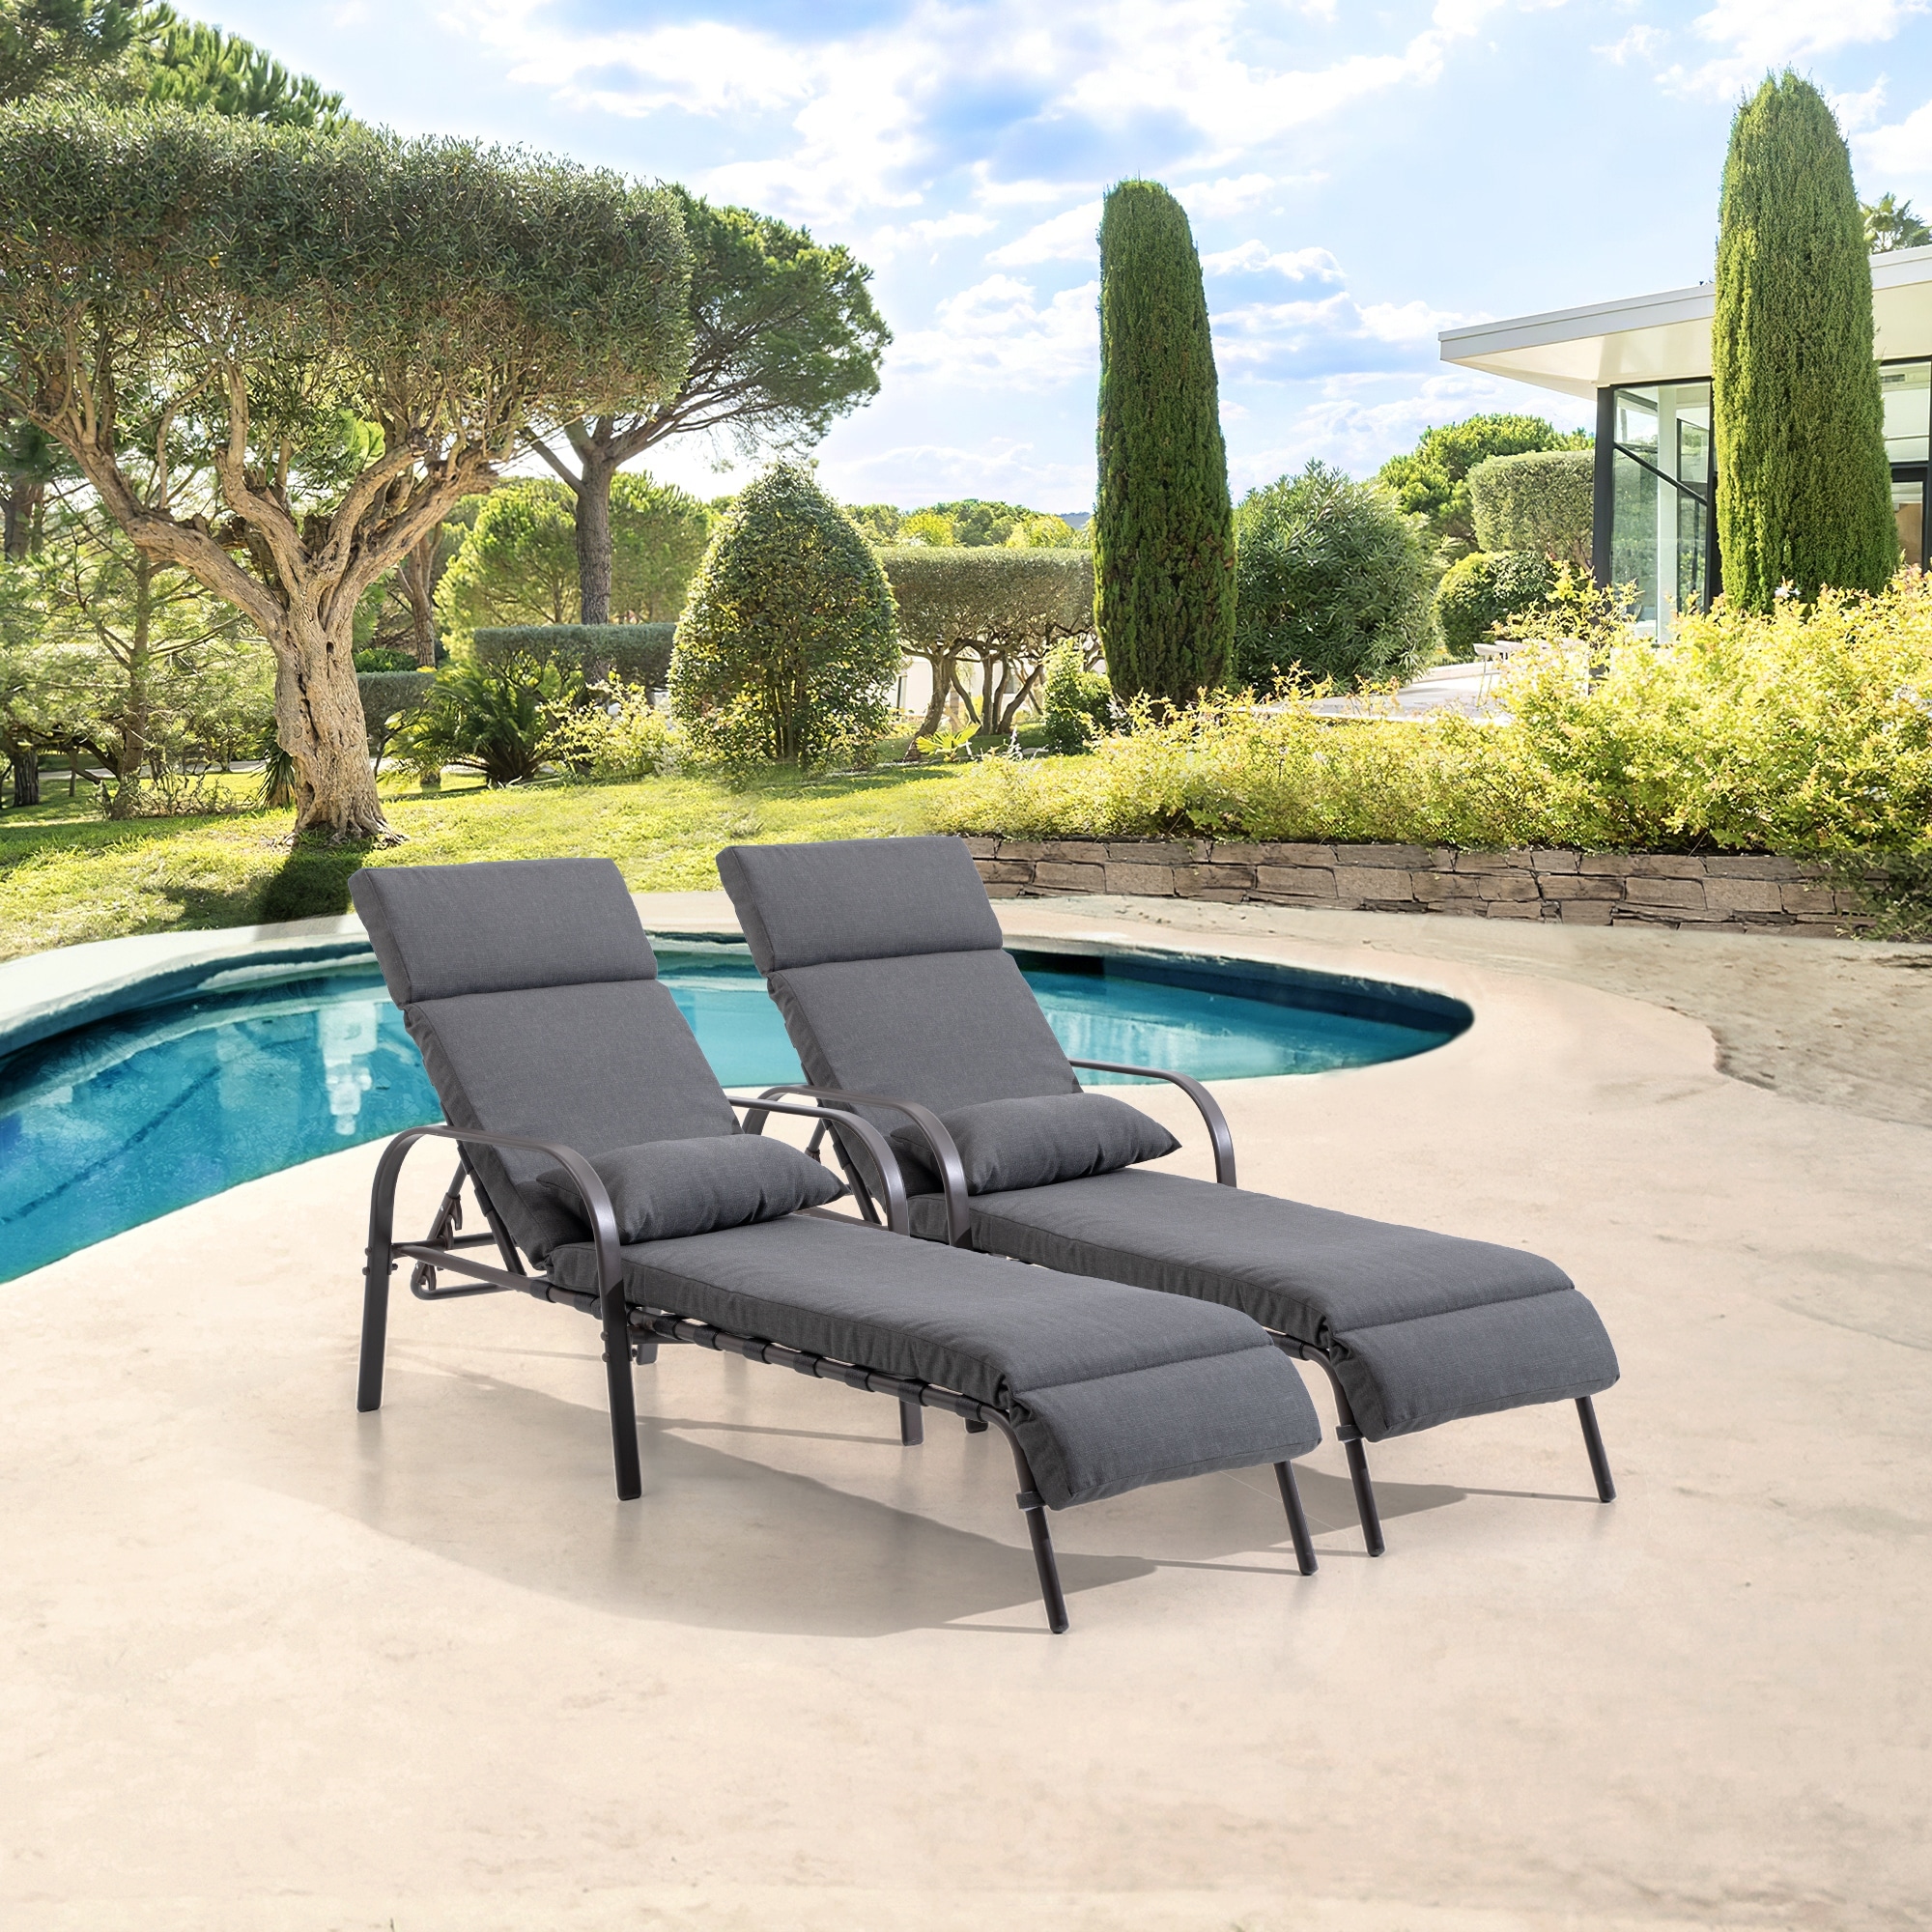 Vredhom Outdoor Adjustable Chaise Lounge With Cushion And Pillow (set Of 2) - Set Of 2